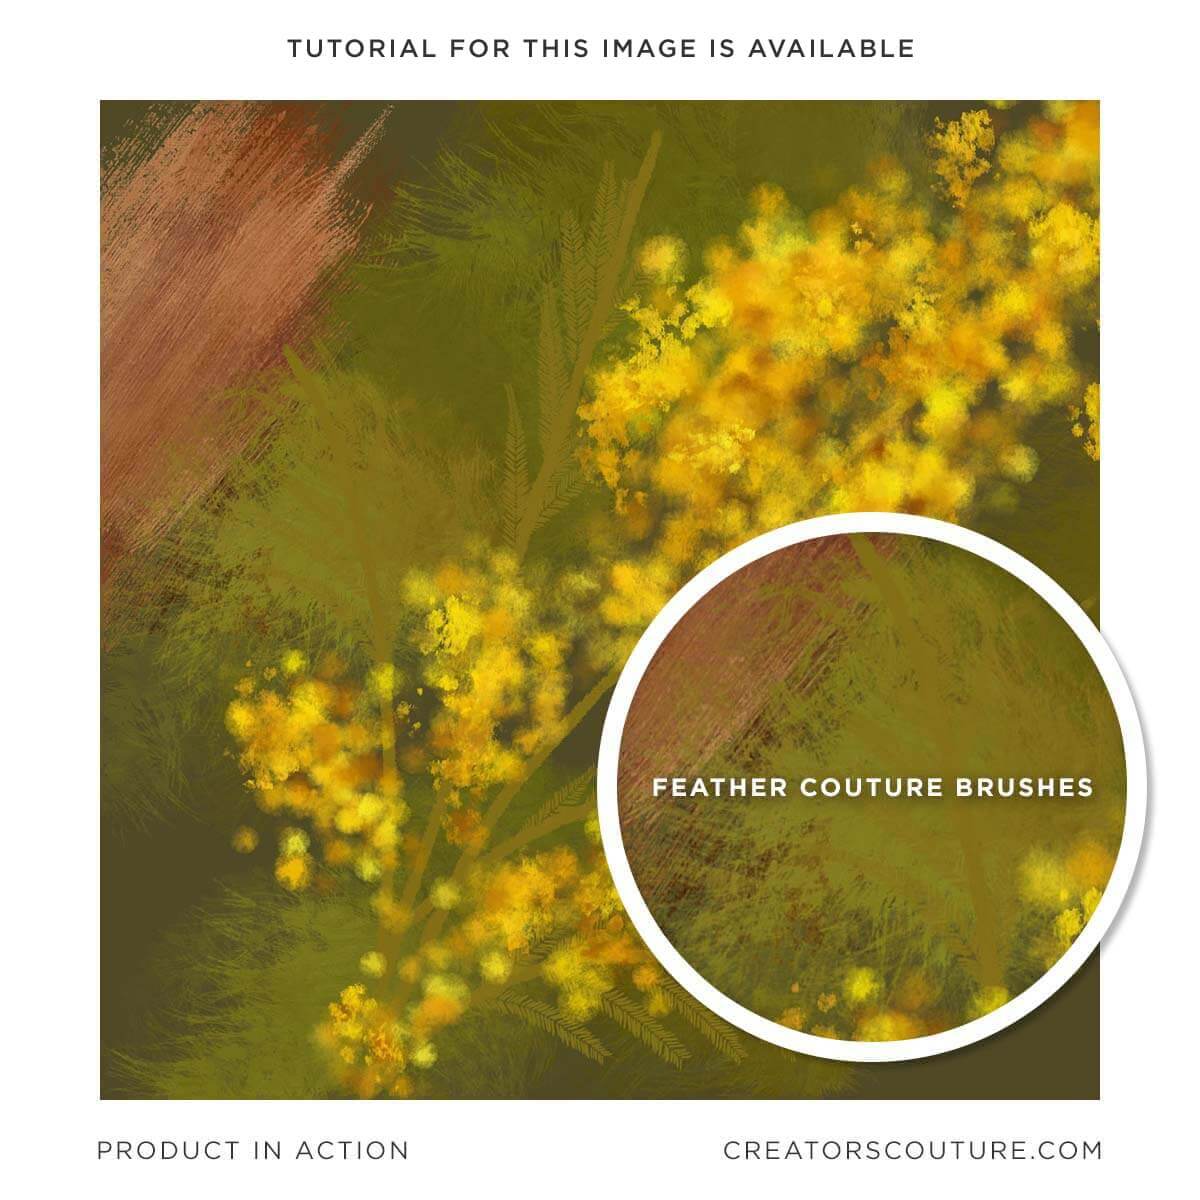 Mimosa branch illustration created using artistic and painterly multicolor photoshop brushes with feather texture